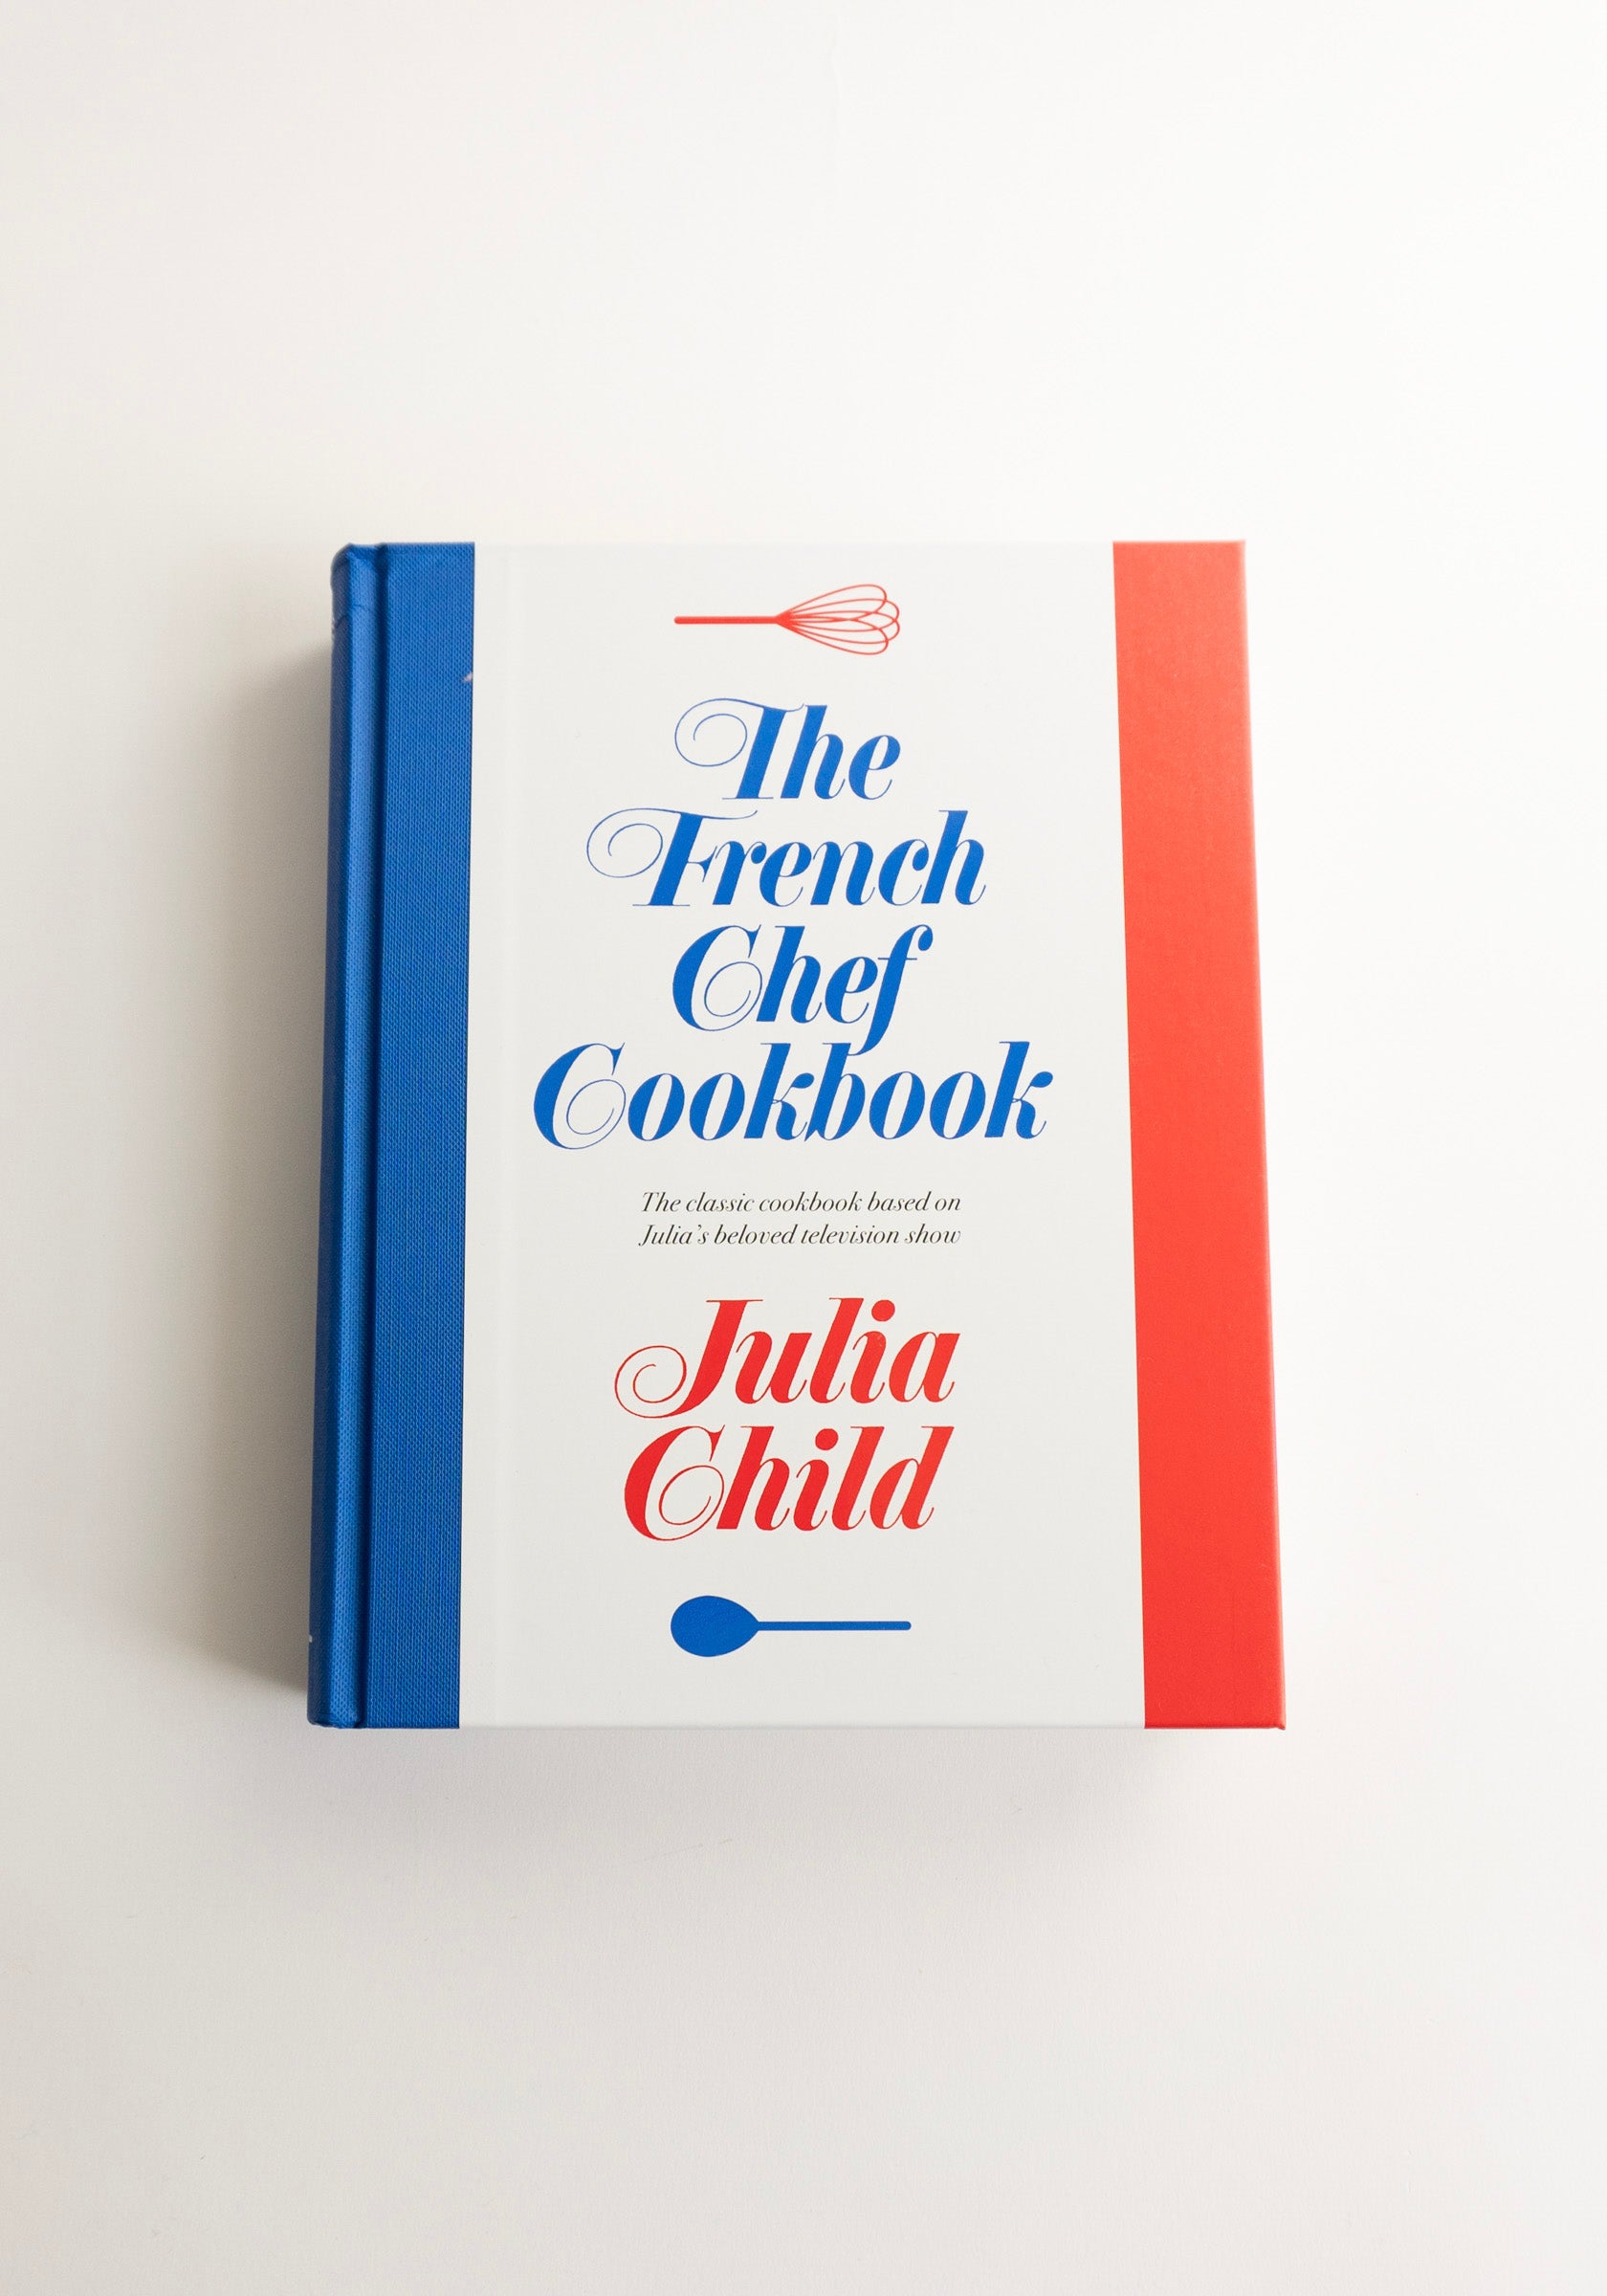 The French Chef Cookbook by Julia Child